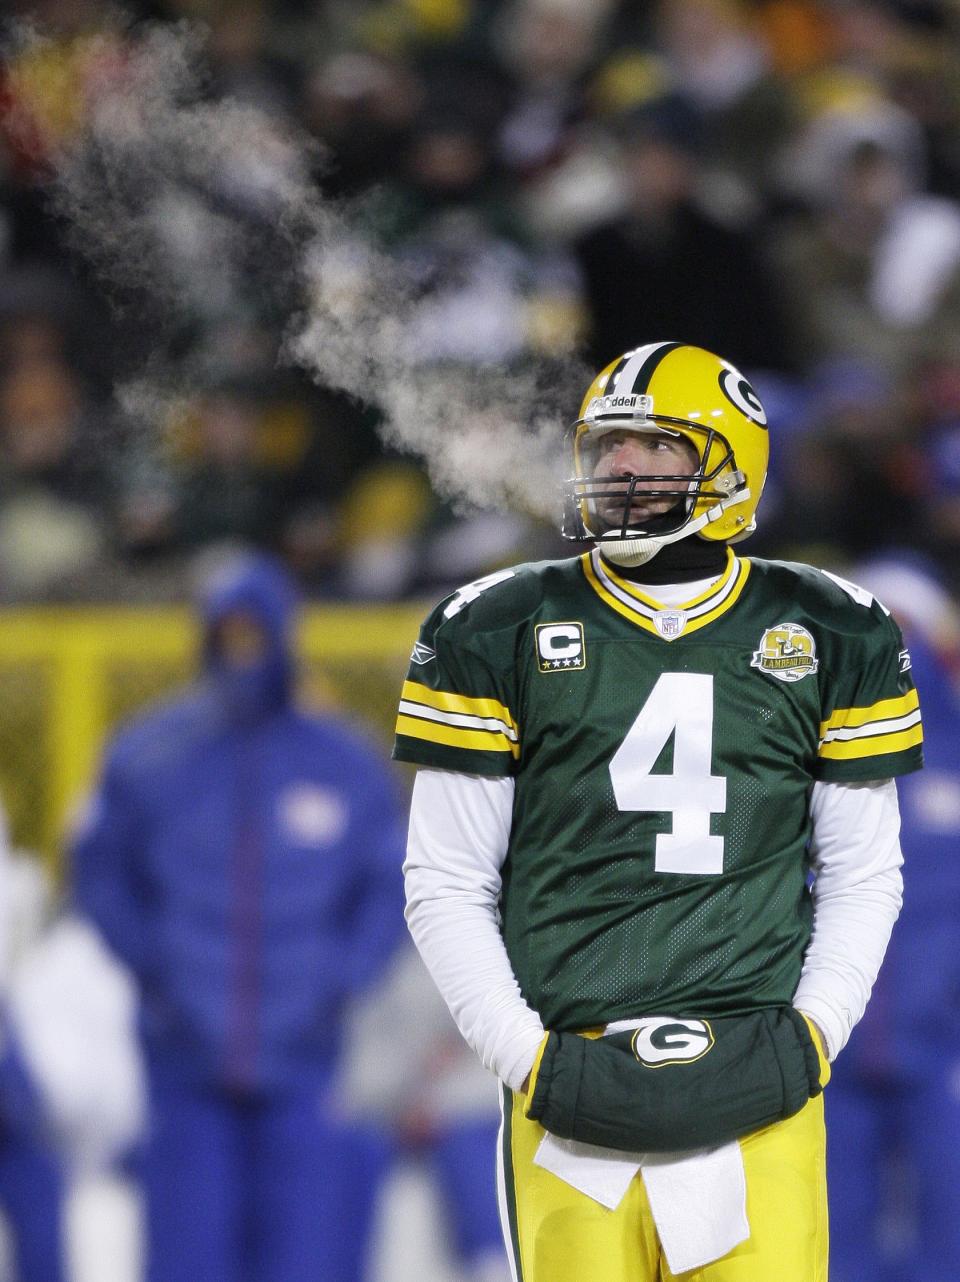 Former Green Bay Packers quarterback Brett Favre and the Packers lost to the Giants 23-20 in overtime of the 2007 NFC Championship game on Jan. 20, 2008. The temperature at game time was minus 1, making it the second coldest game at Lambeau Field.